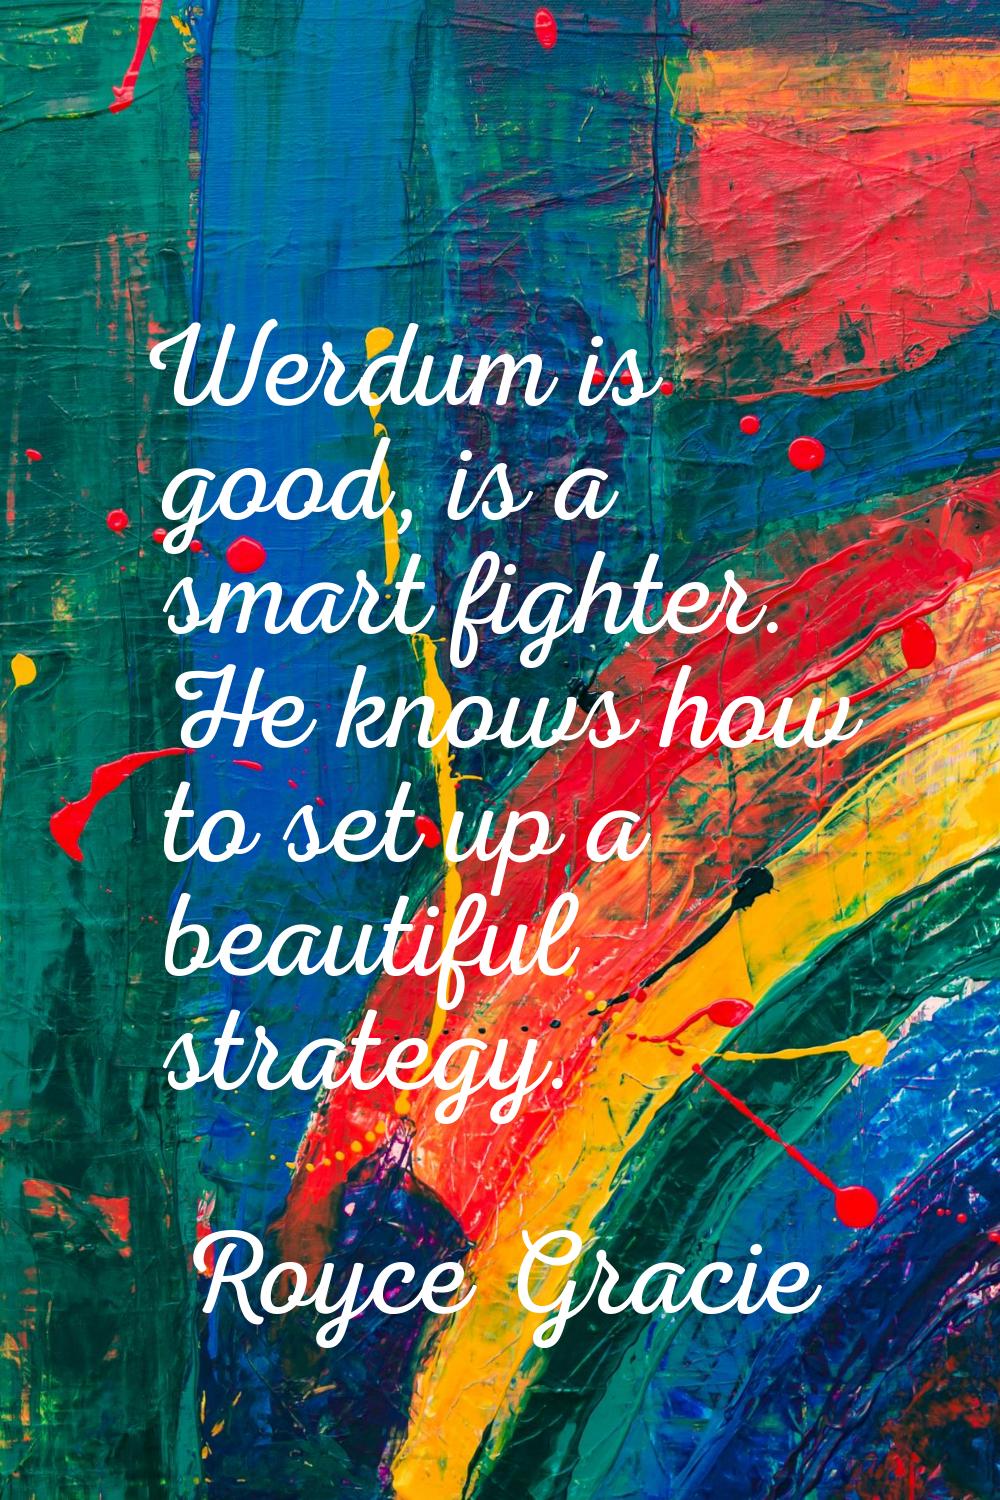 Werdum is good, is a smart fighter. He knows how to set up a beautiful strategy.